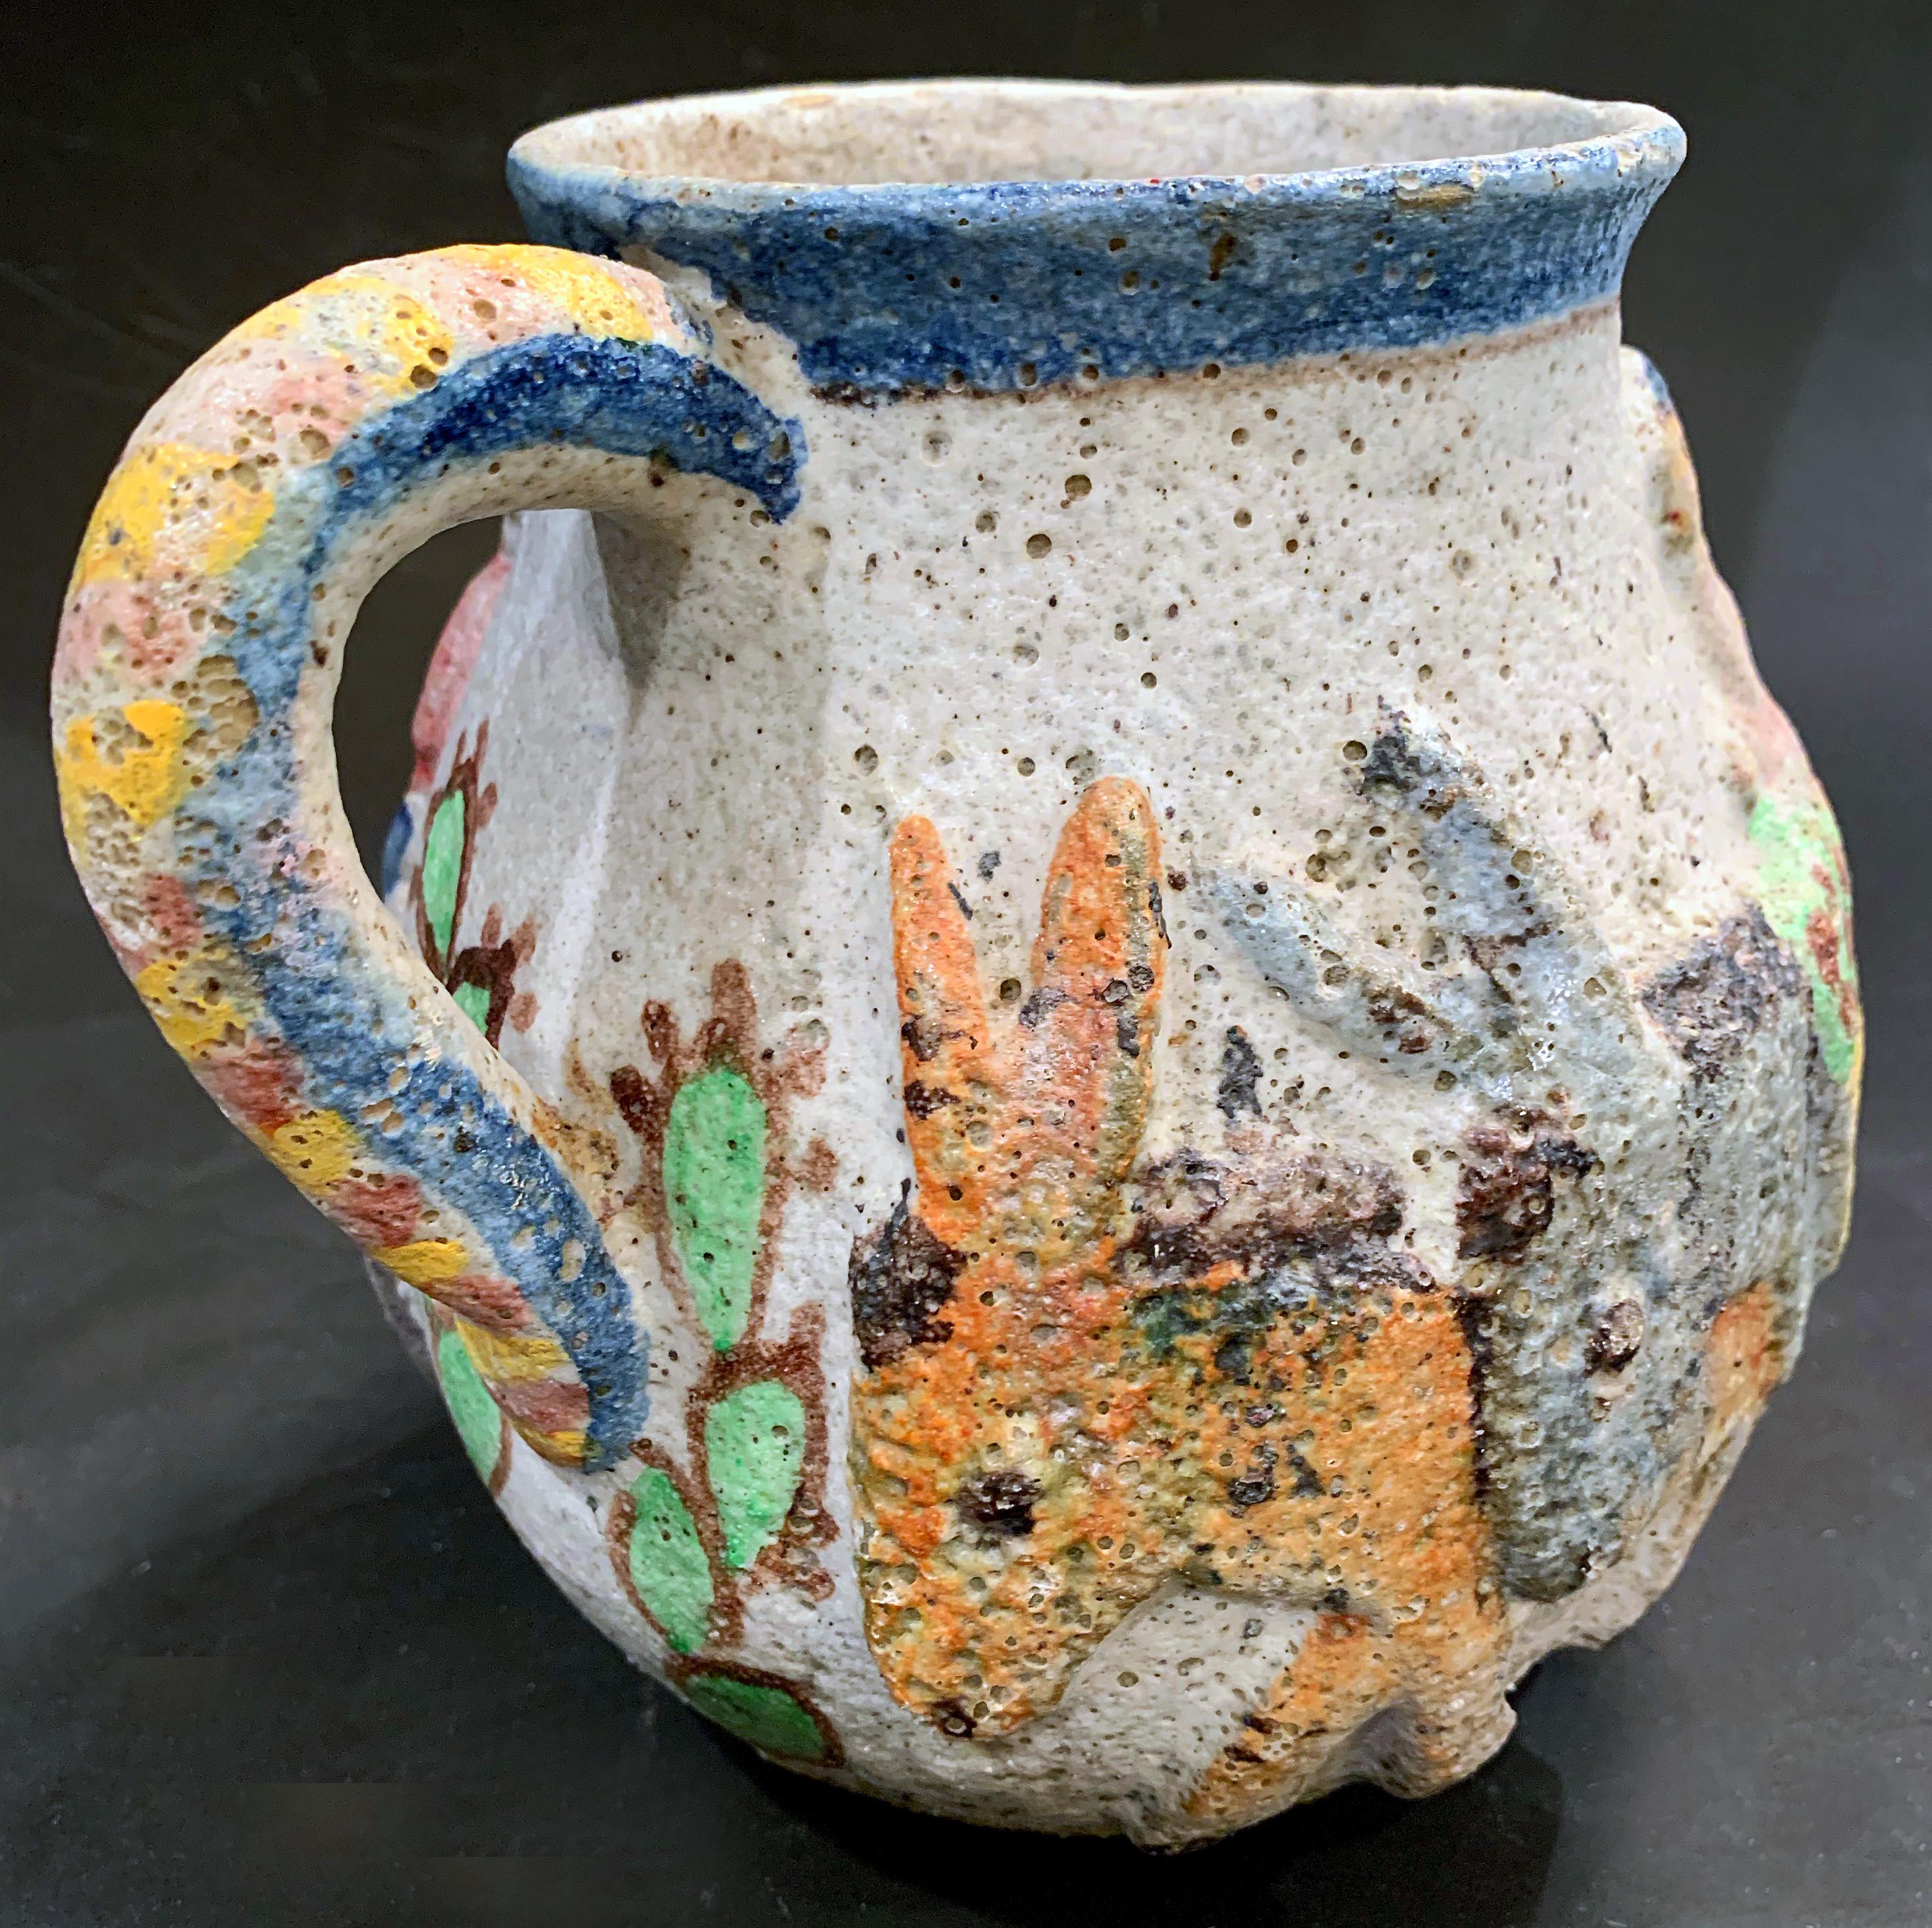 Full of charm and gorgeous color, with a modern approach to traditional imagery, this 1930s pitcher made by Industria Ceramica Salernita (I.C.S.) features a line of donkeys supporting a man taking baskets of fruit to market. I.C.S. was the most